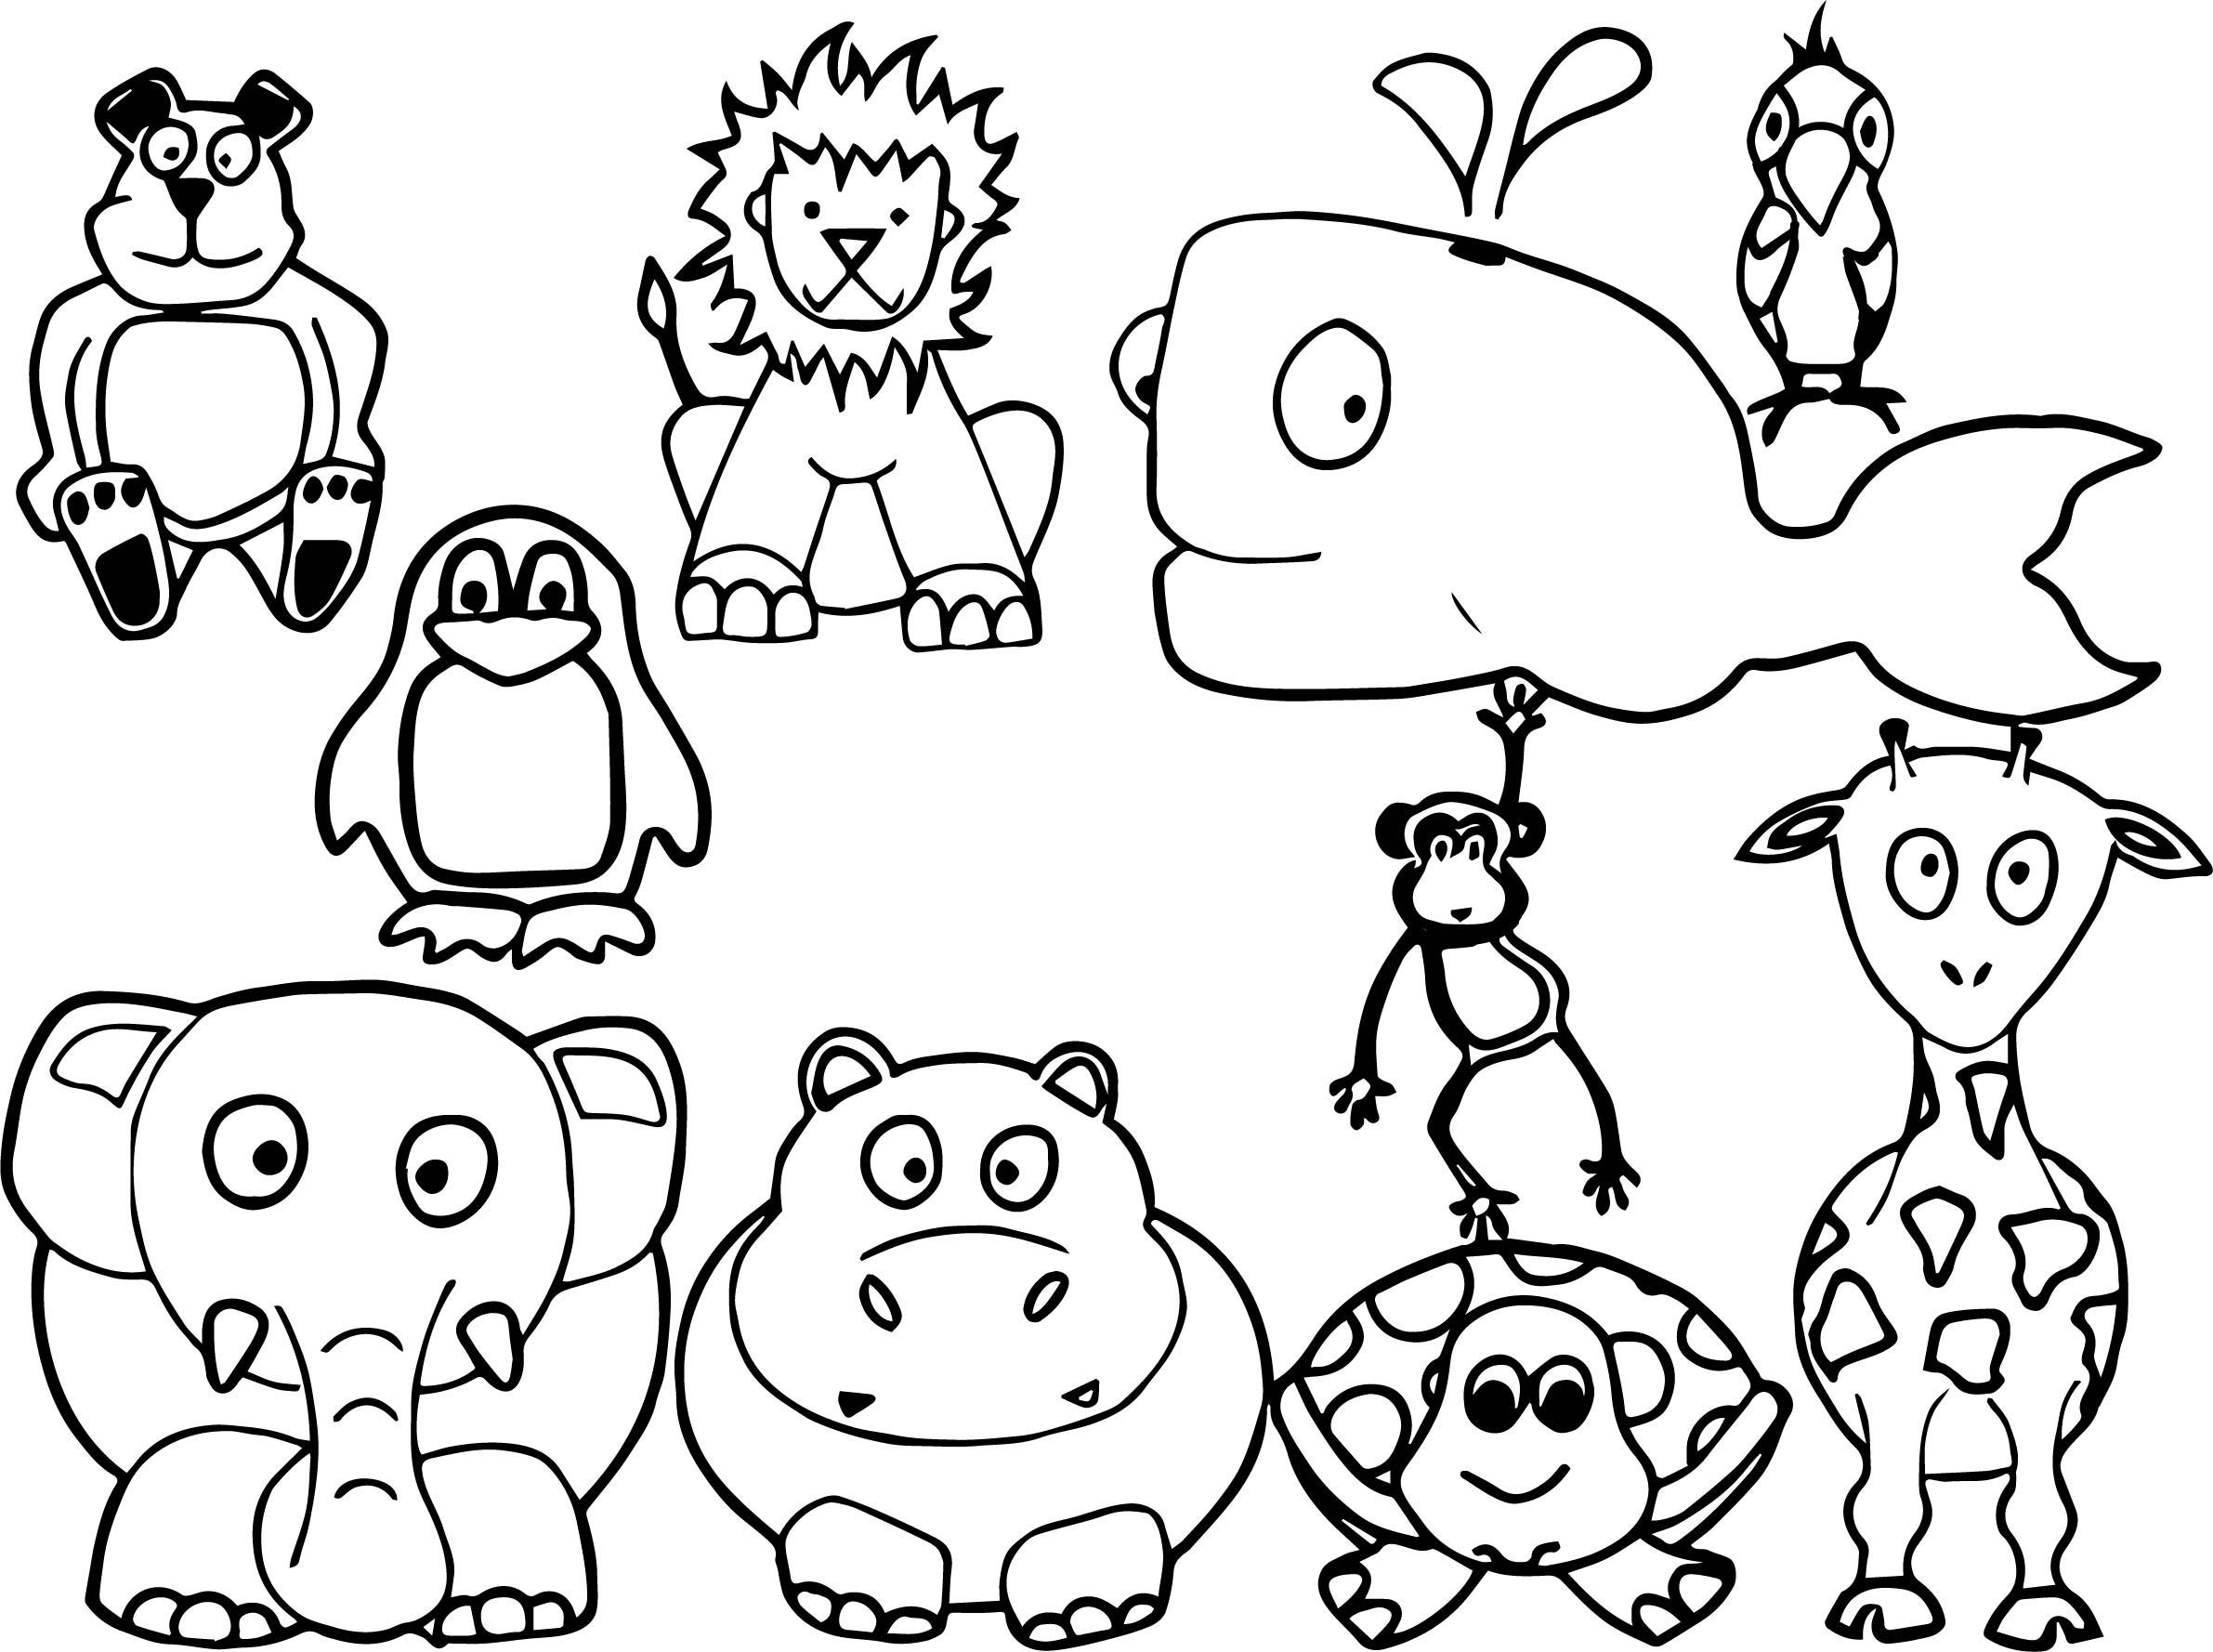 Free Printable Coloring Pages Animals
 Animal Coloring Pages Best Coloring Pages For Kids